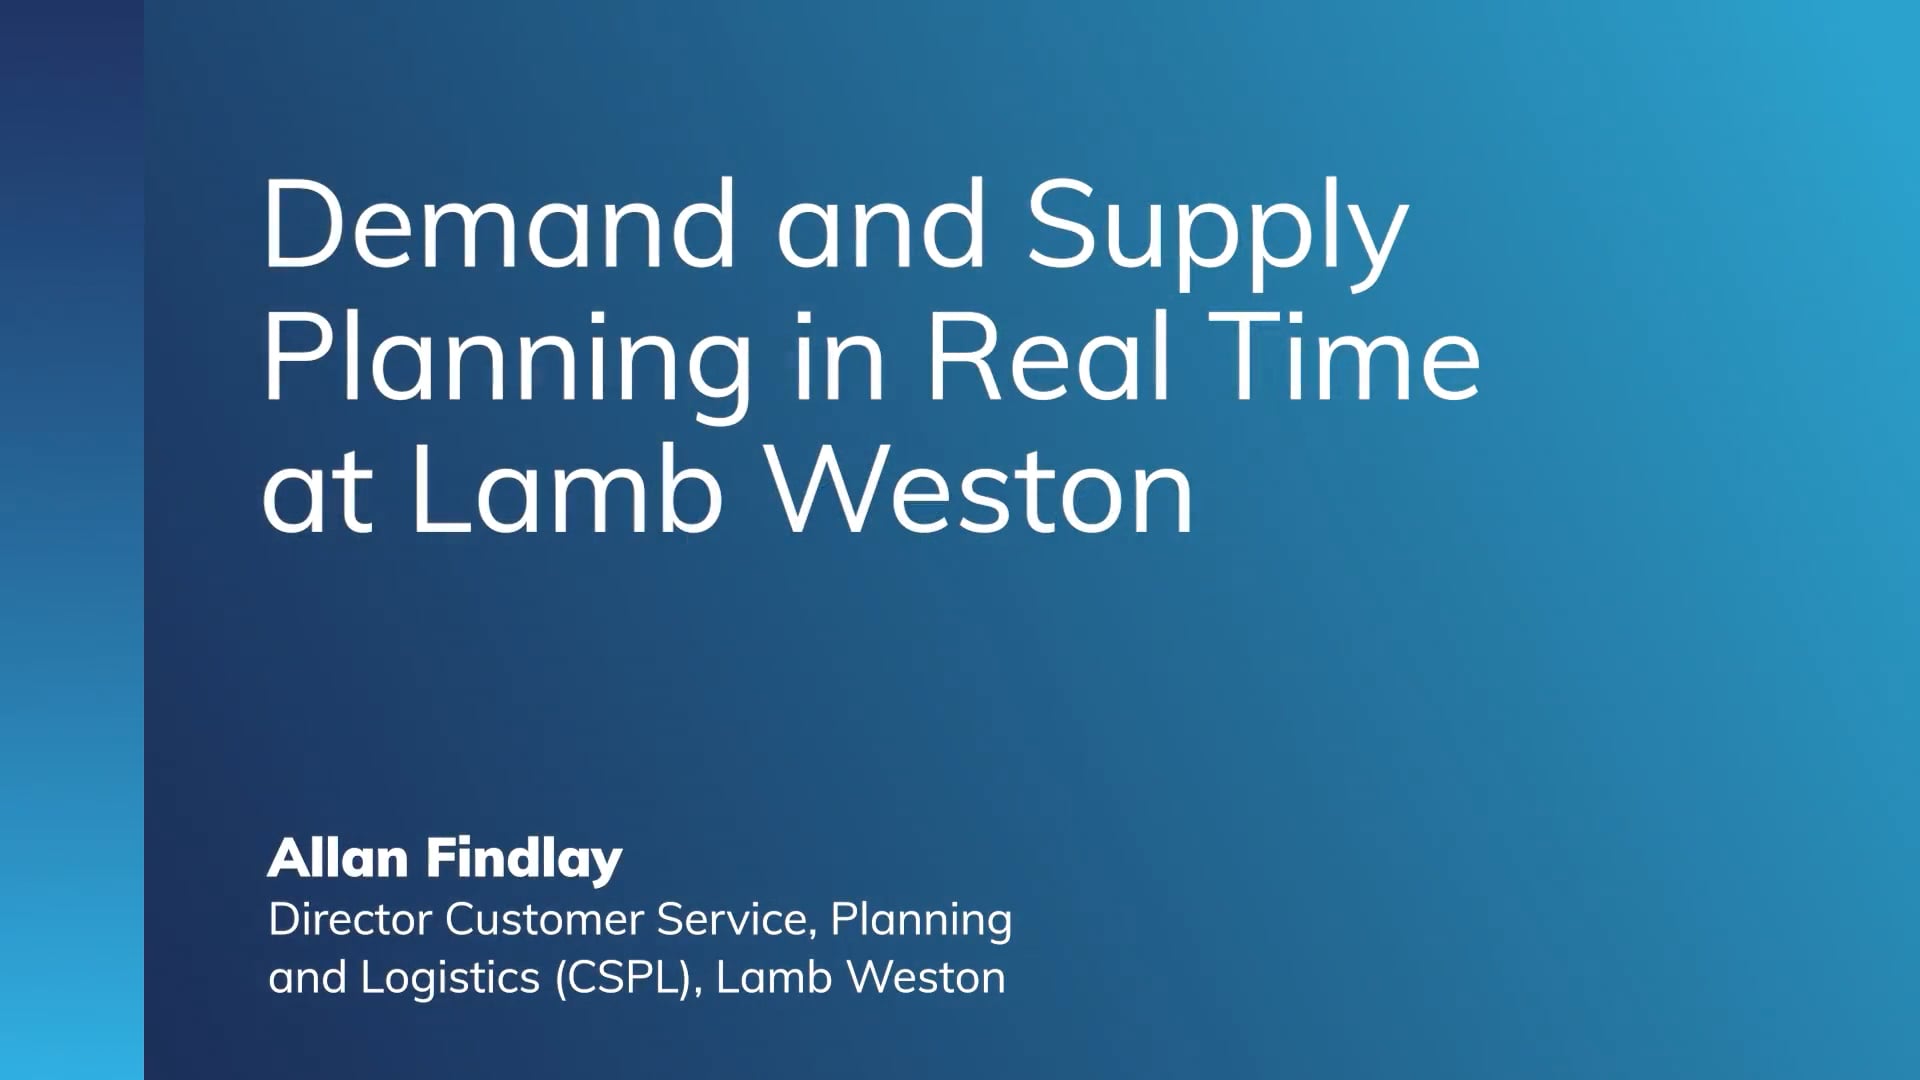 Board in Action: Demand and Supply Planning in Real Time at Lamb Weston